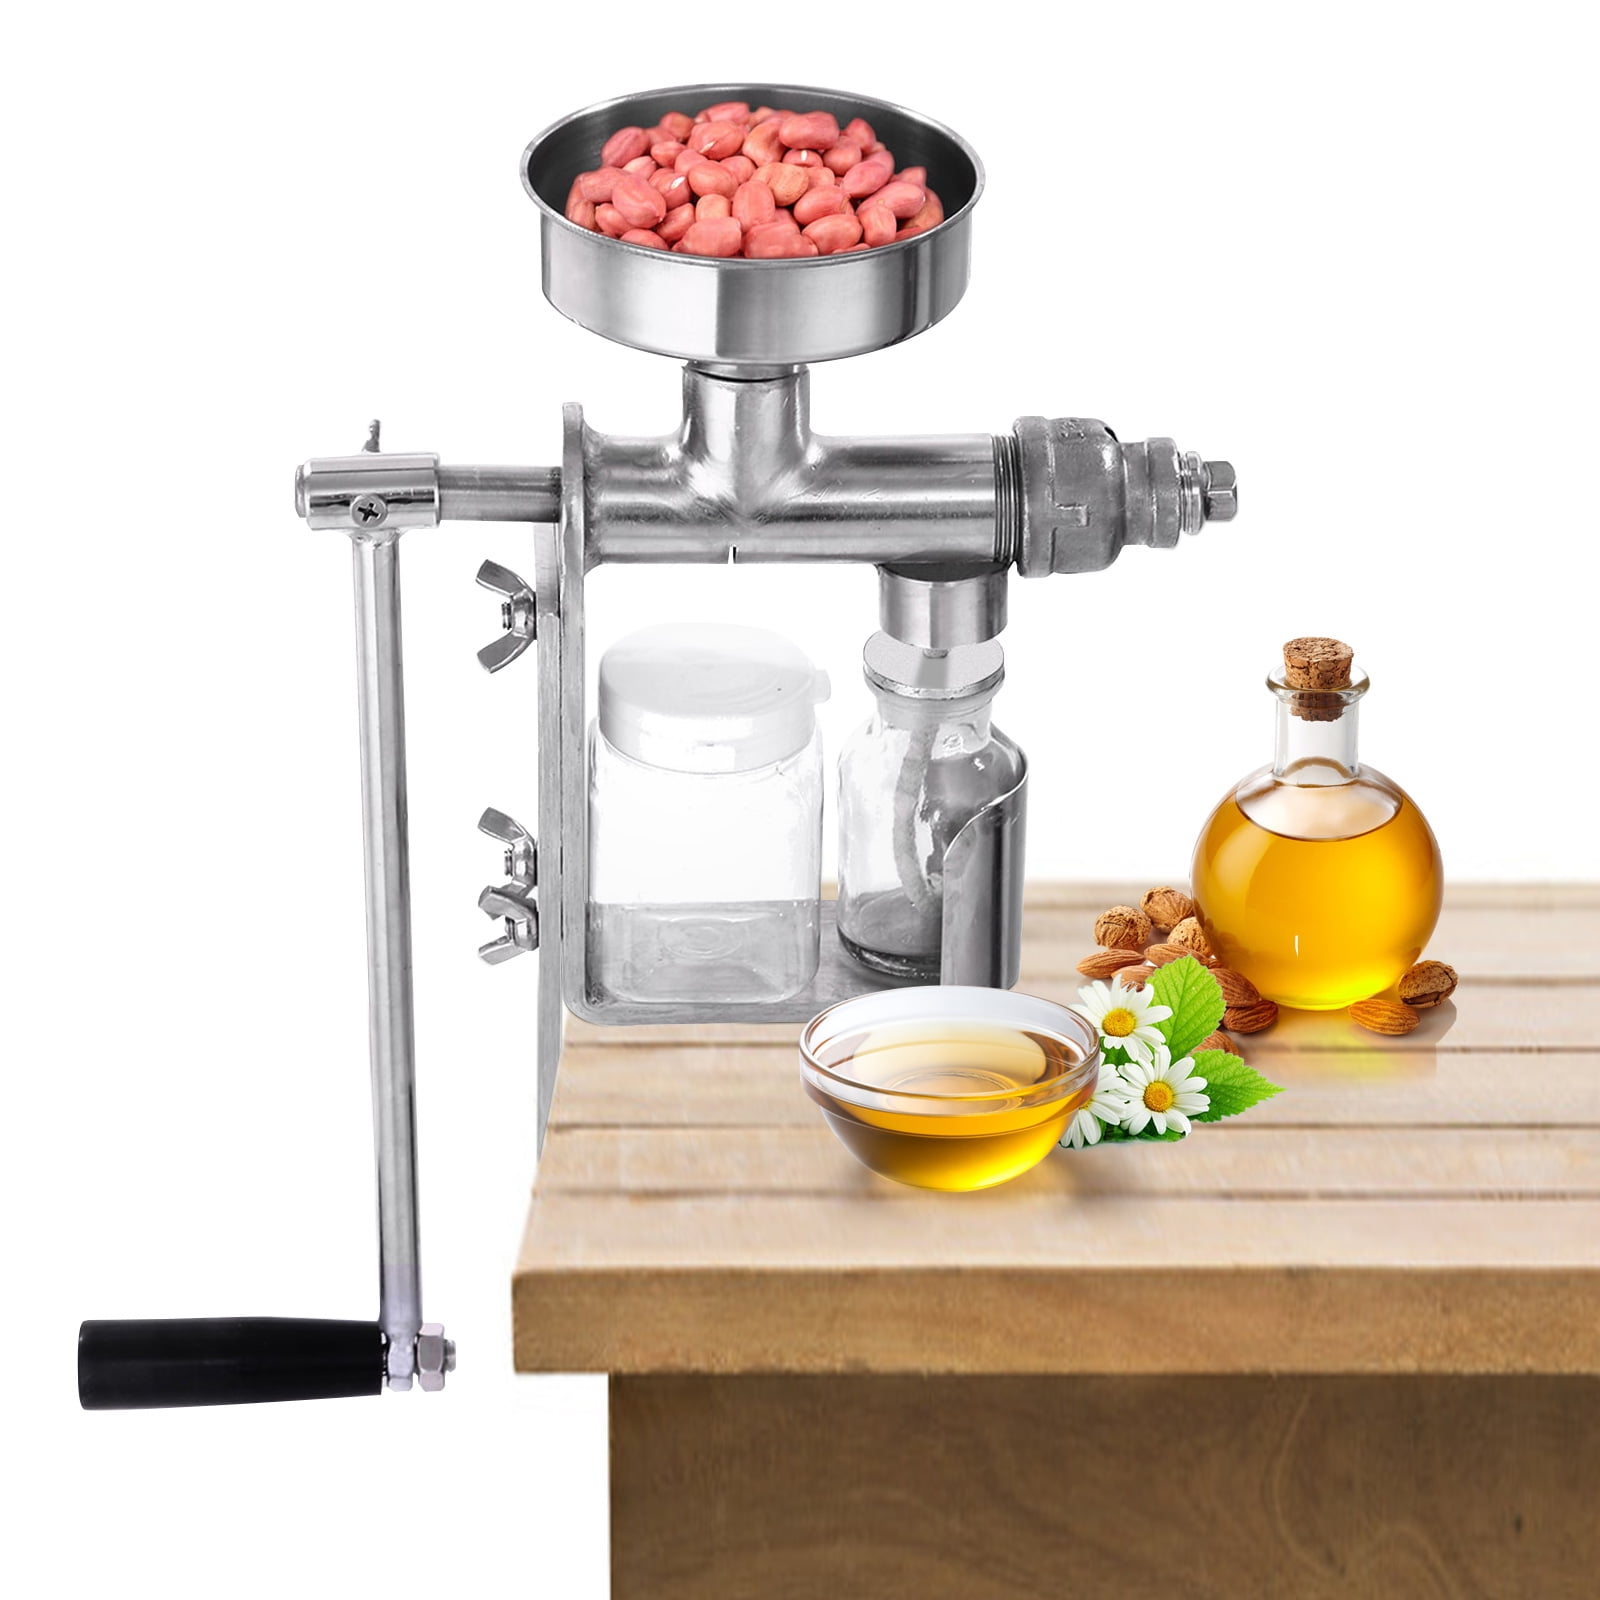 Peanut Nuts Seeds Stainless Steel Oil Press Home/Commercial Oil Expeller 501 LCD Digital Display Cold Hot Automatic Electric Oil Expeller with LCD Digital Display InLoveArts Oil Press Machine 600W